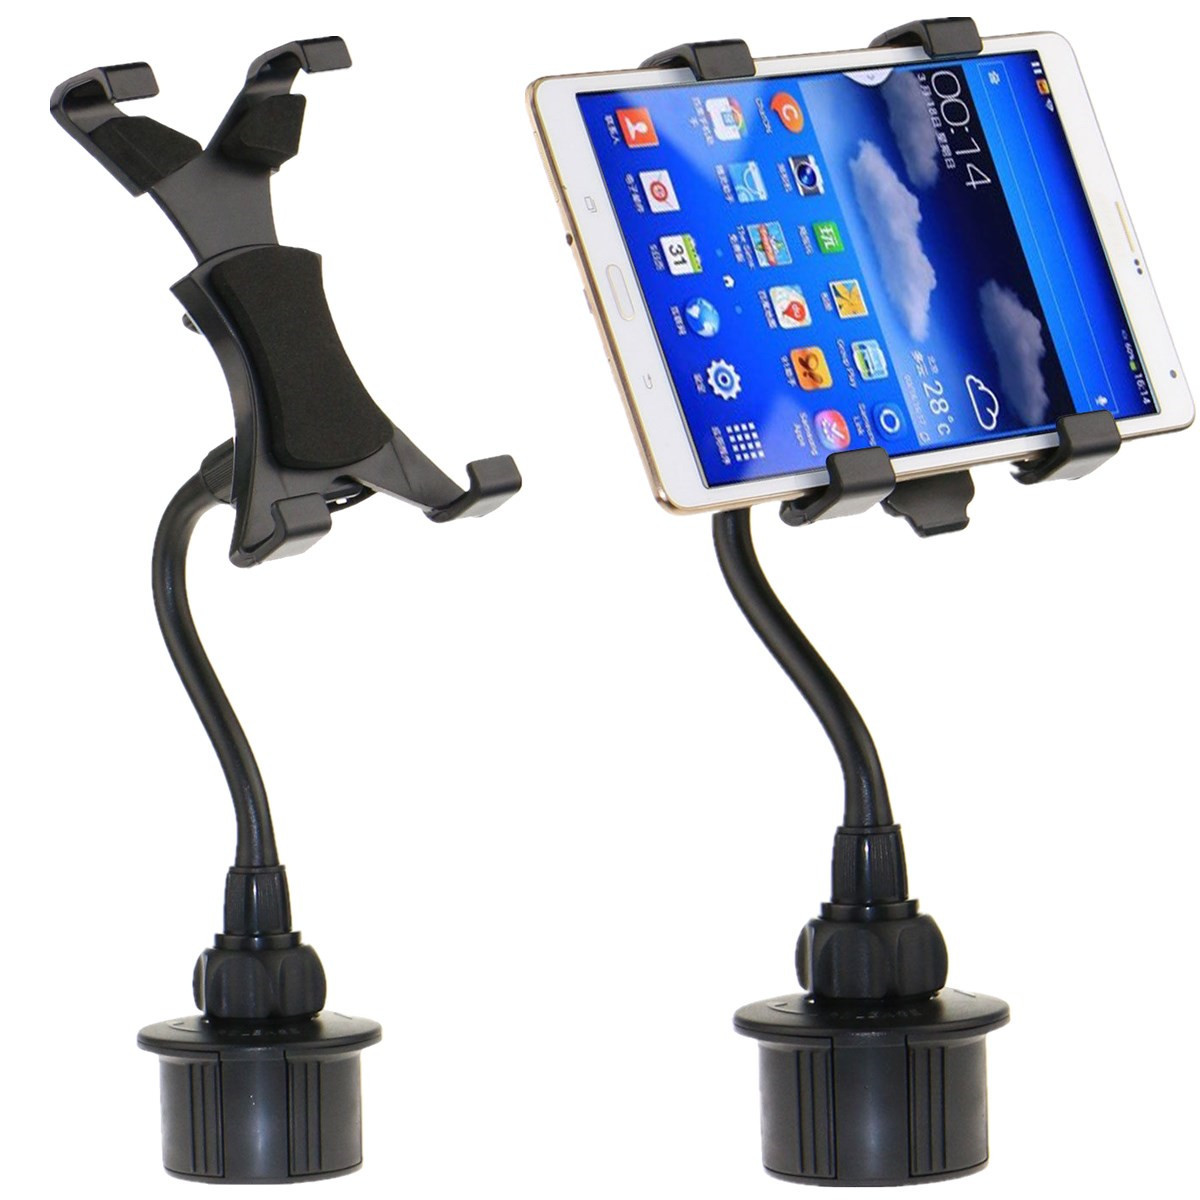 Adjustable-Bendy-Car-Cup-Holder-Mount-for-7-Inch-to-10-Inch-Tablet-1115144-1